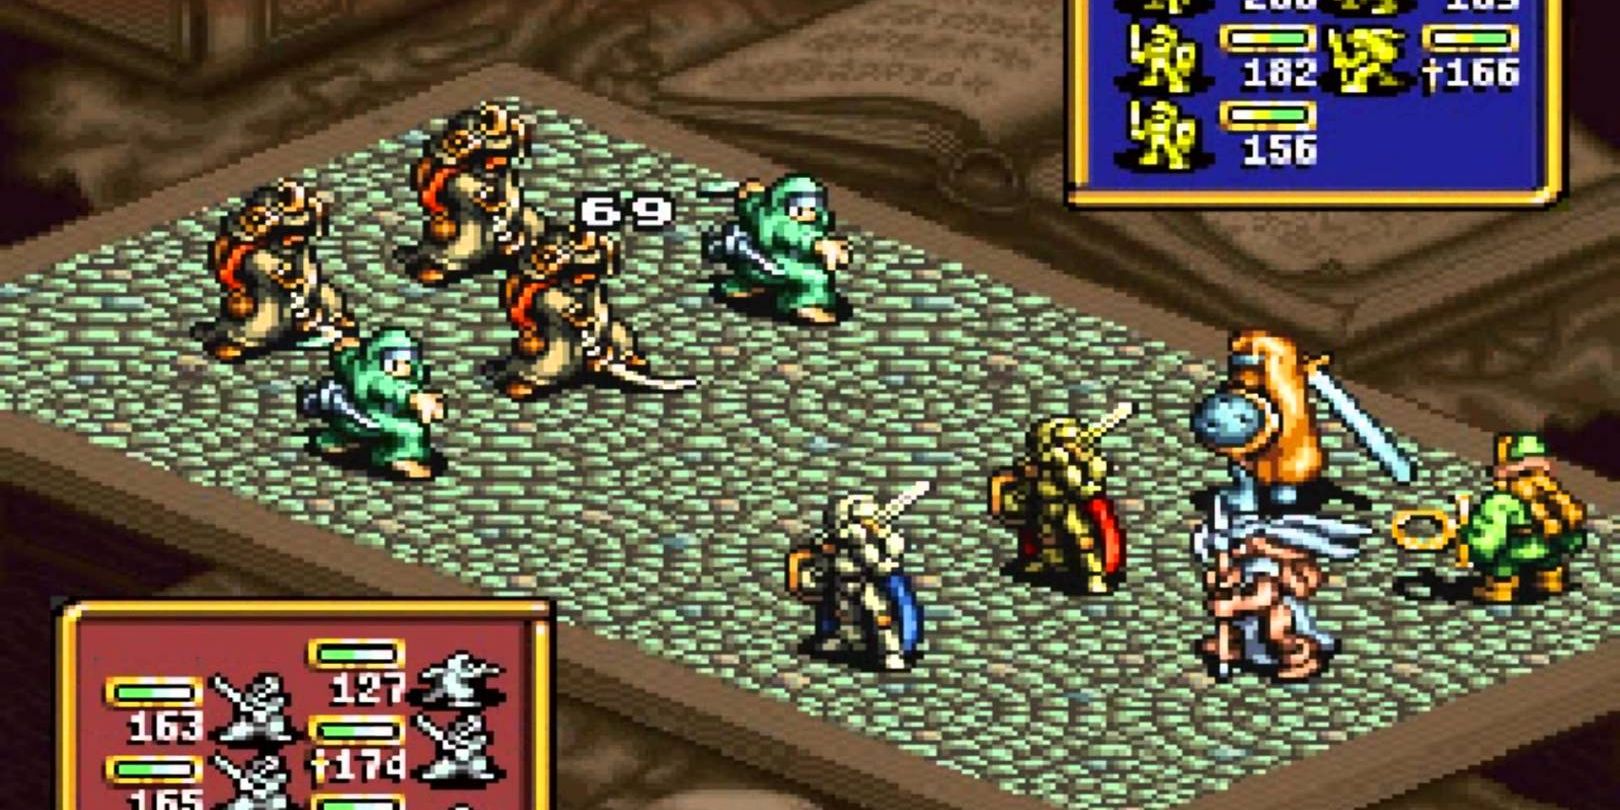 A battle plays out in Ogre Battle: March Of The Black Queen for the SNES